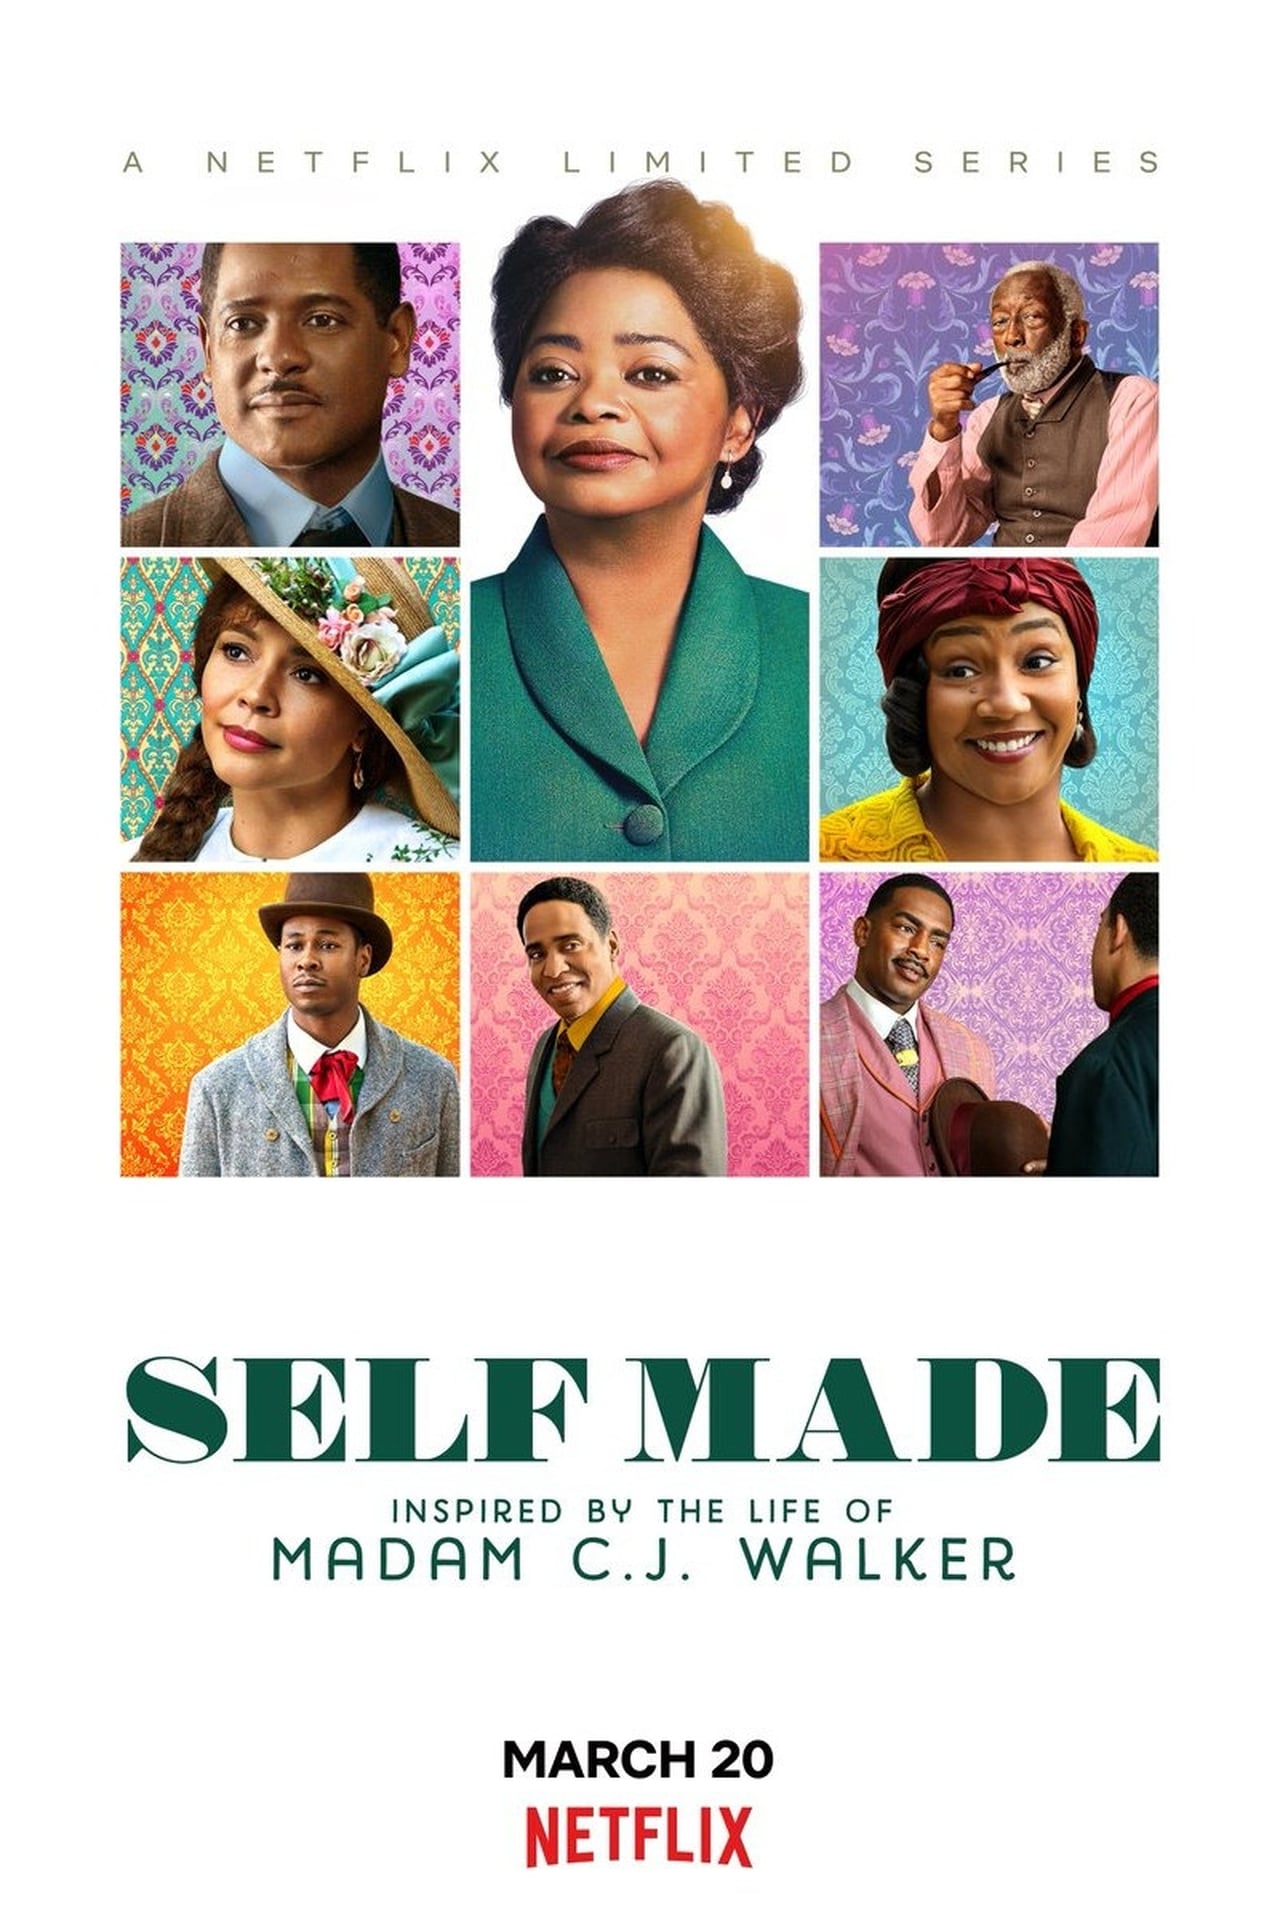 Self Made: Inspired by the Life of Madam C.J. Walker (2020) S1 EP01&EP04 640Kbps 23.976Fps 48Khz 5.1Ch DD+ NF E-AC3 Turkish Audio TAC